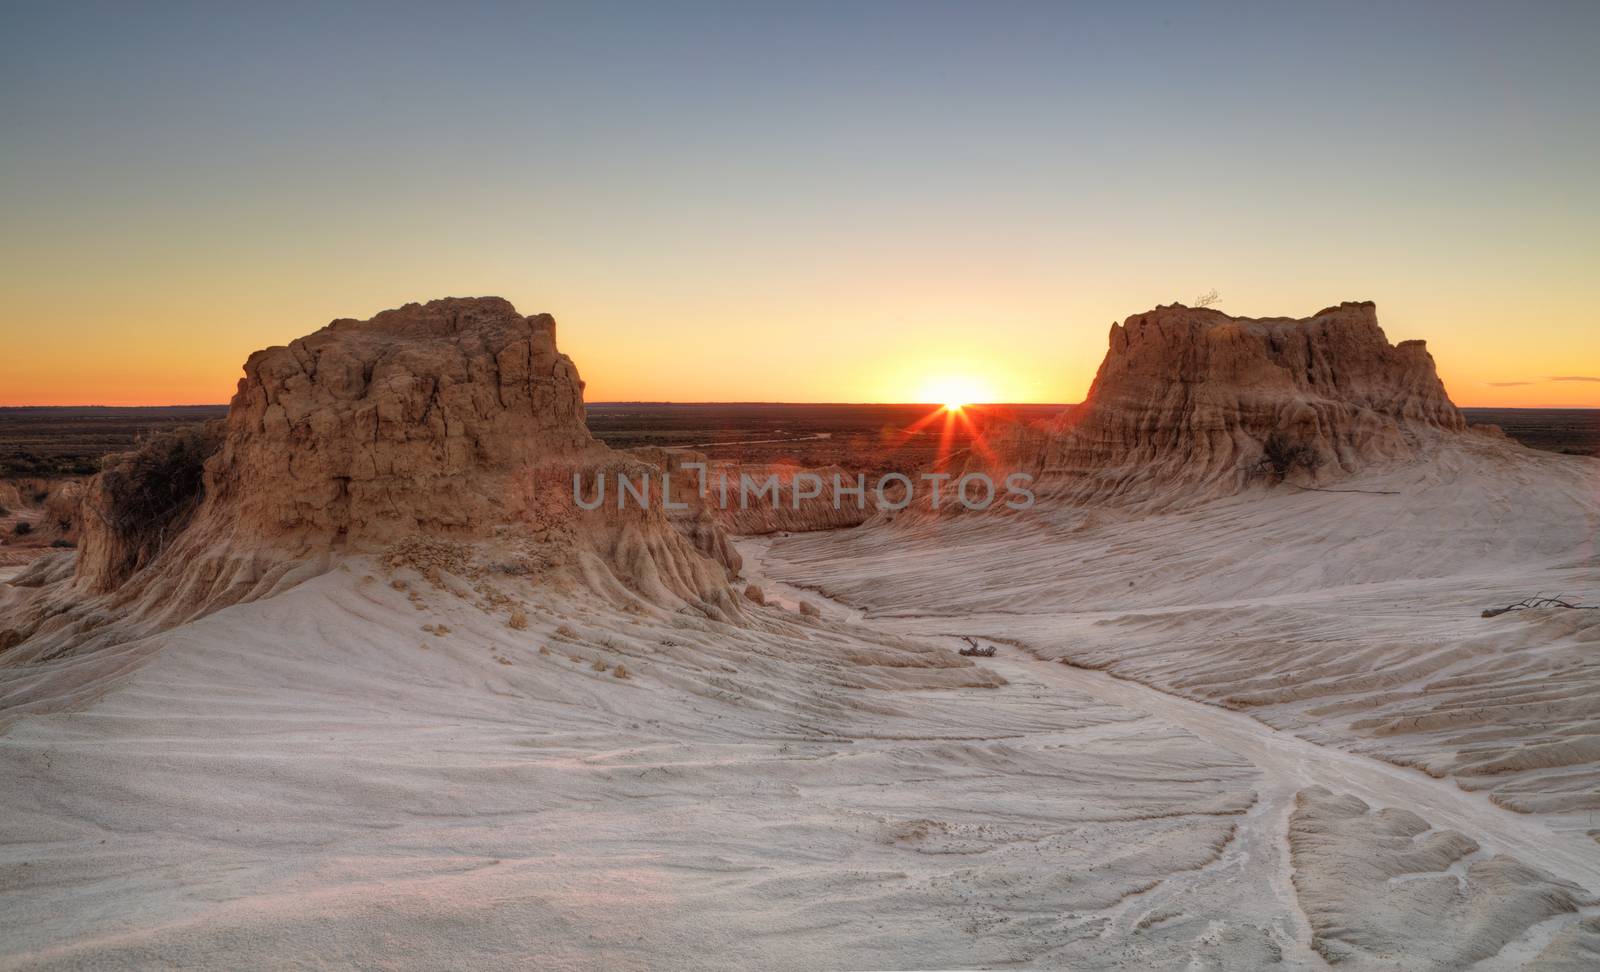 Sunset at Mungo by lovleah